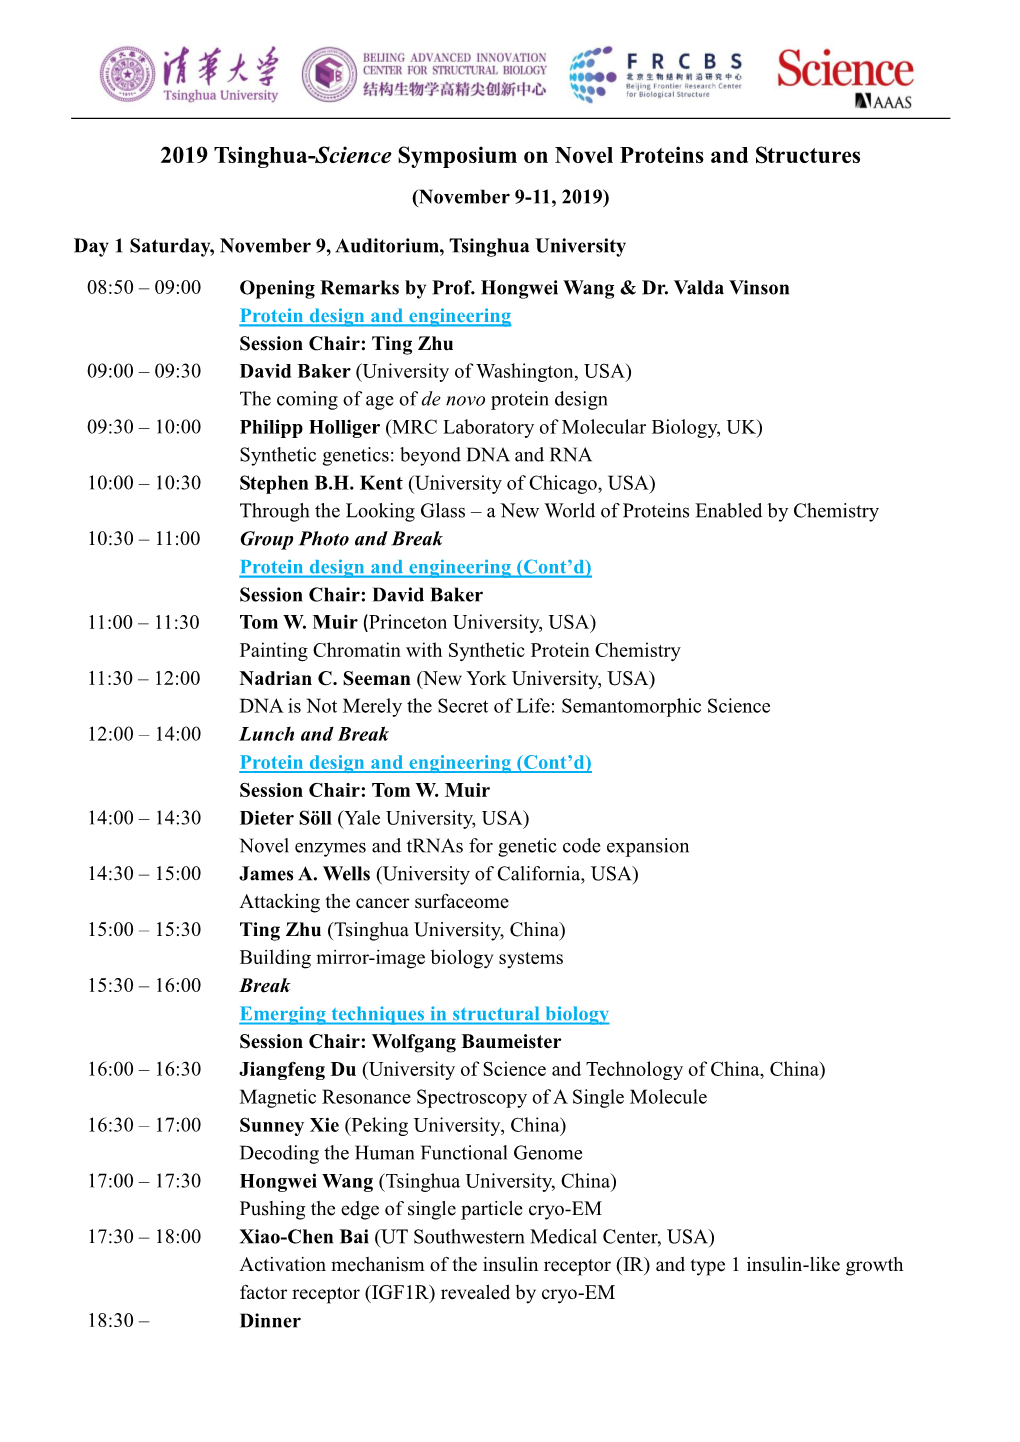 2019 Tsinghua-Science Symposium on Novel Proteins and Structures (November 9-11, 2019)